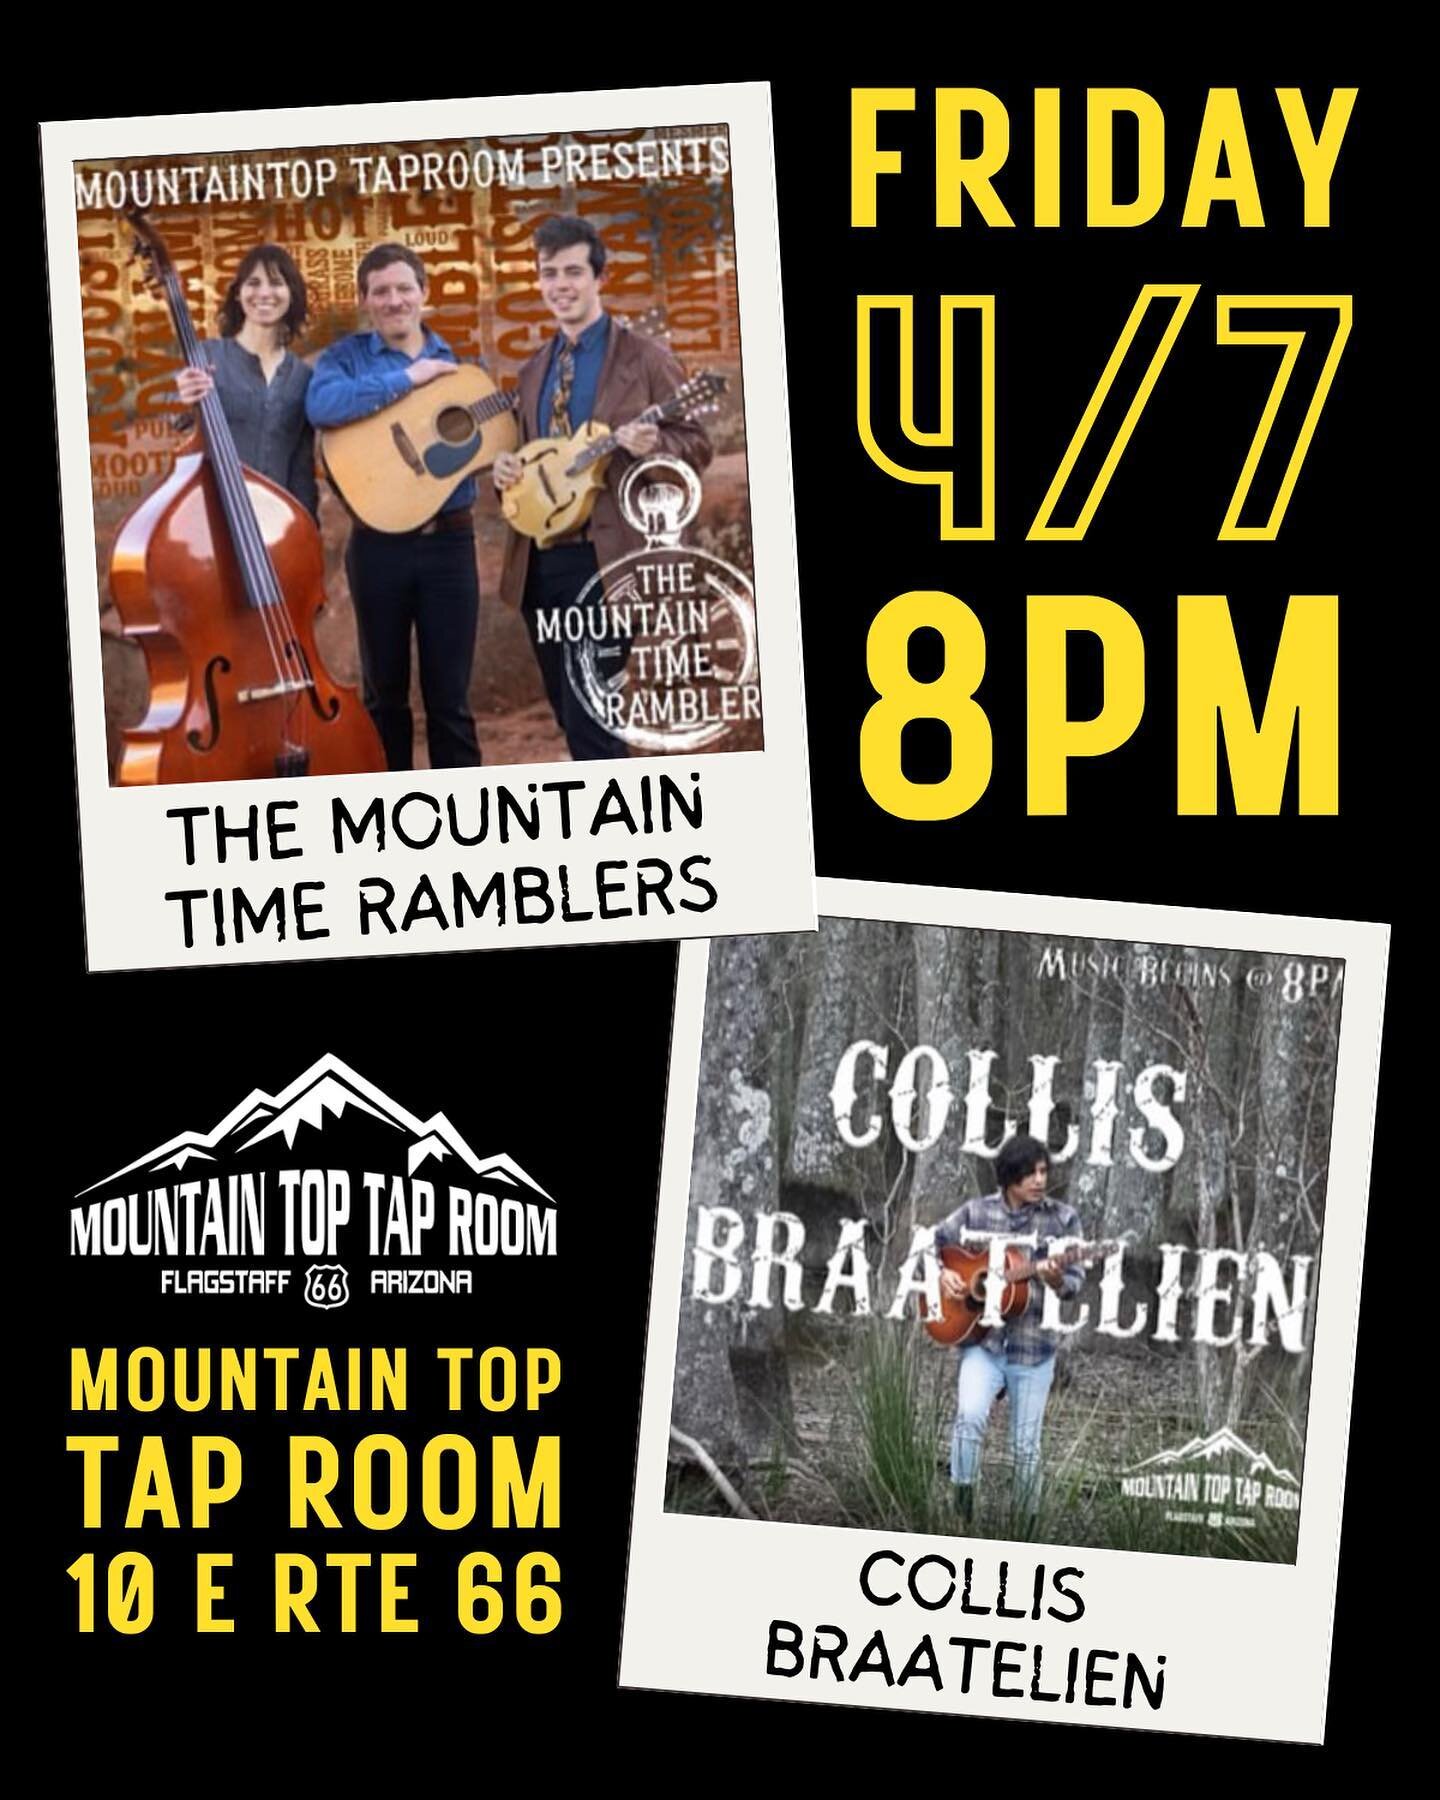 This Friday the @mountaintimeramblers are back to jam with y&rsquo;all, accompanied by Collis Braatelien! It&rsquo;s gonna be a fun night! 🎶